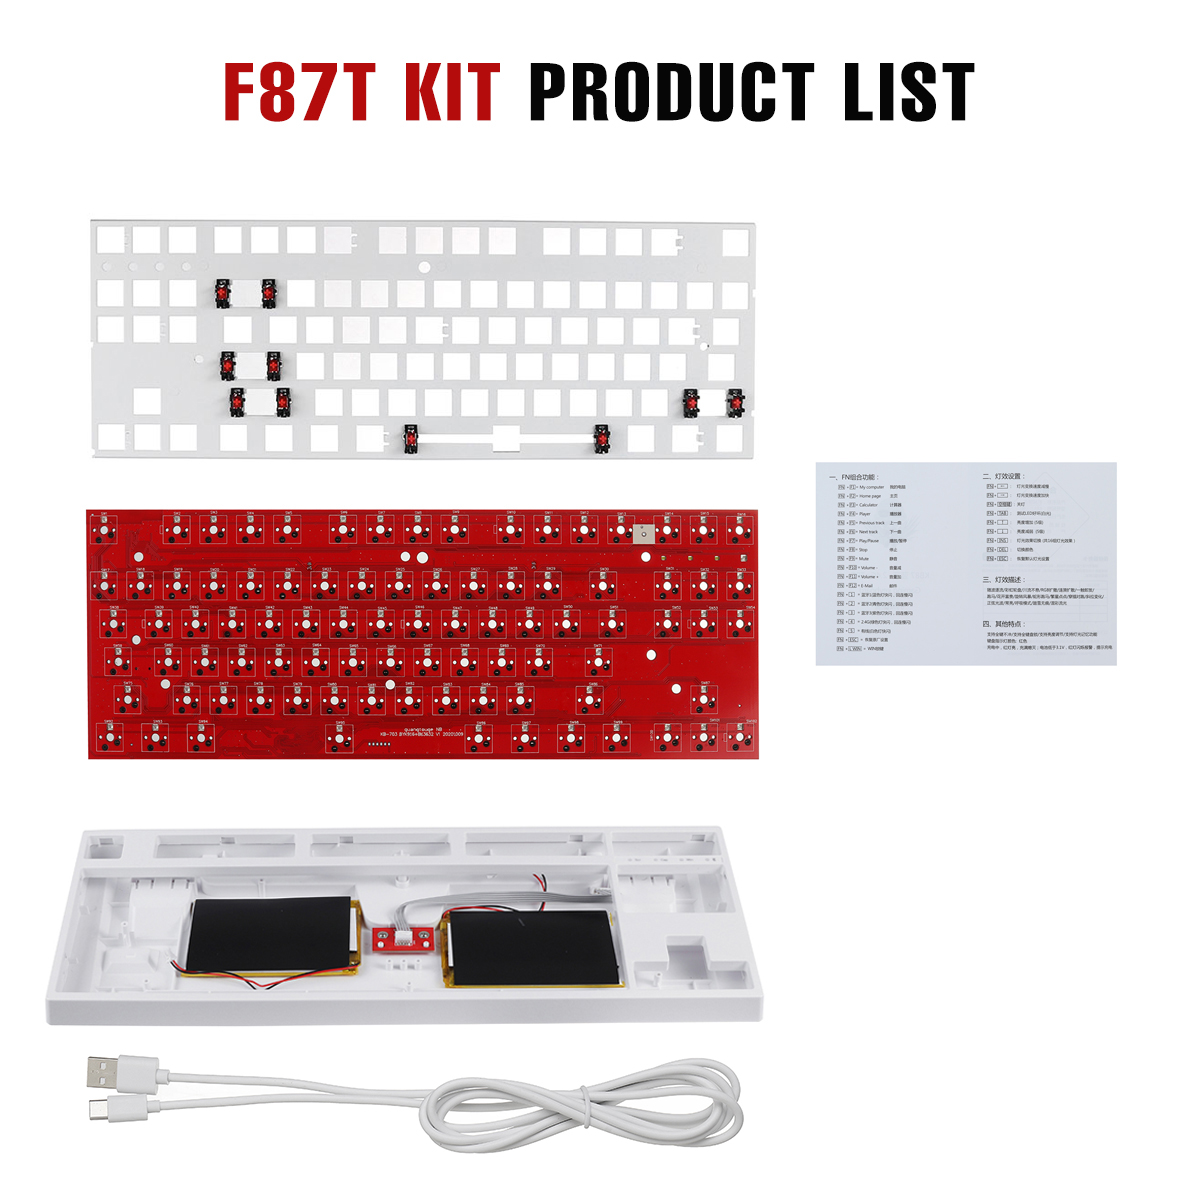 FEKER-87-Keys-Customized-Keyboard-Kit-Hotswappable-24G-bluetooth-RGB-Backlight-Frosted-ABS-Case-DIY--1876697-2